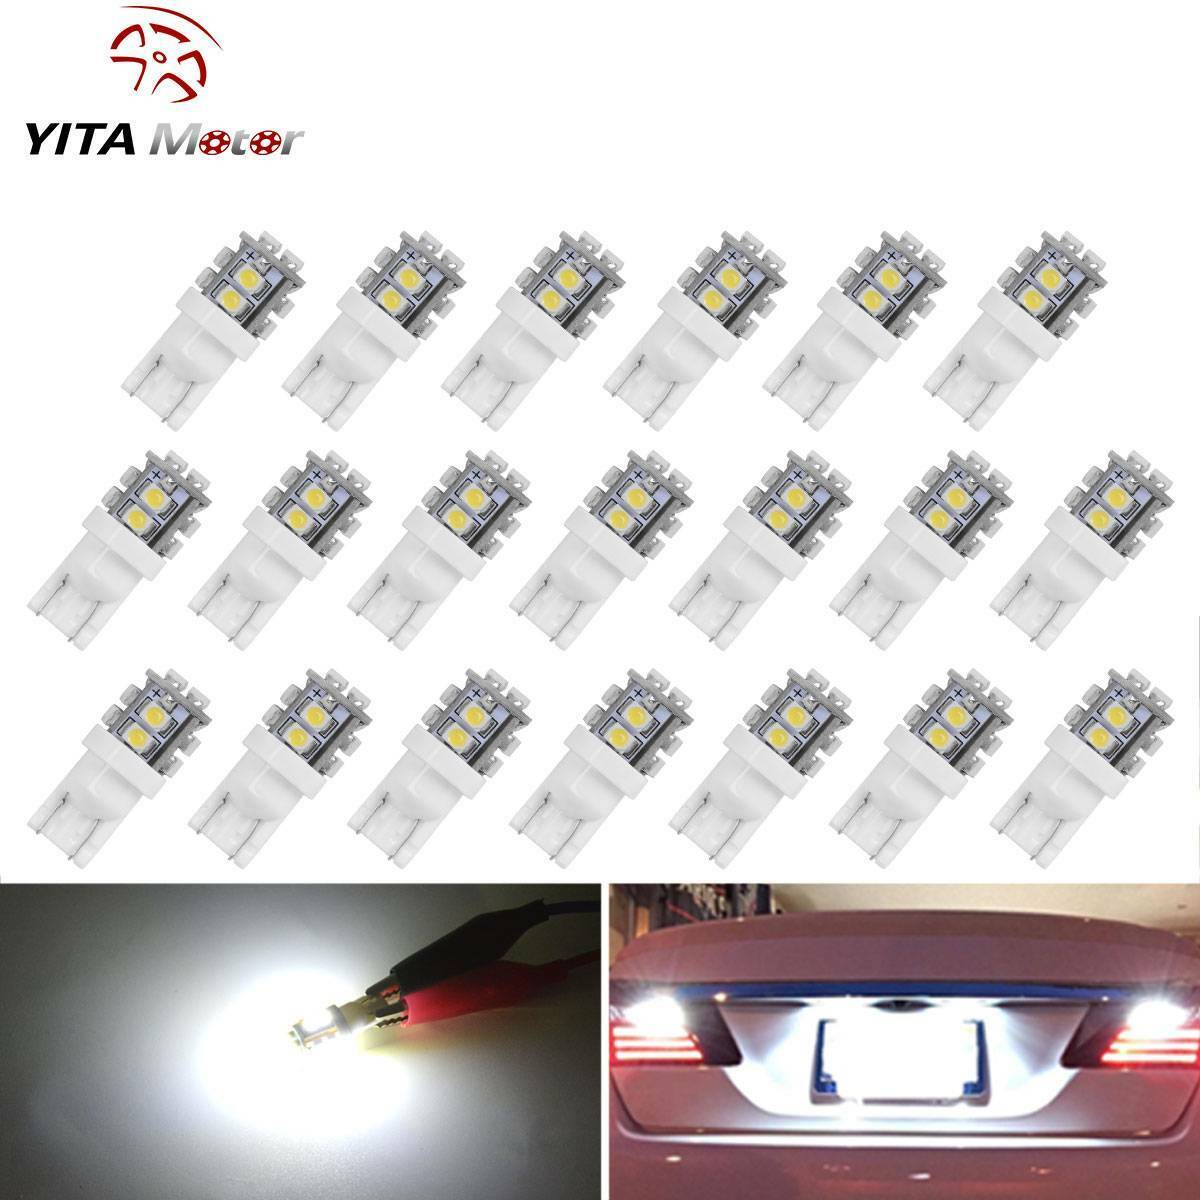 YITAMOTOR 20PCS White T10 192 921 194 Side Wedge 20SMD LED Dome Map Light Bulbs